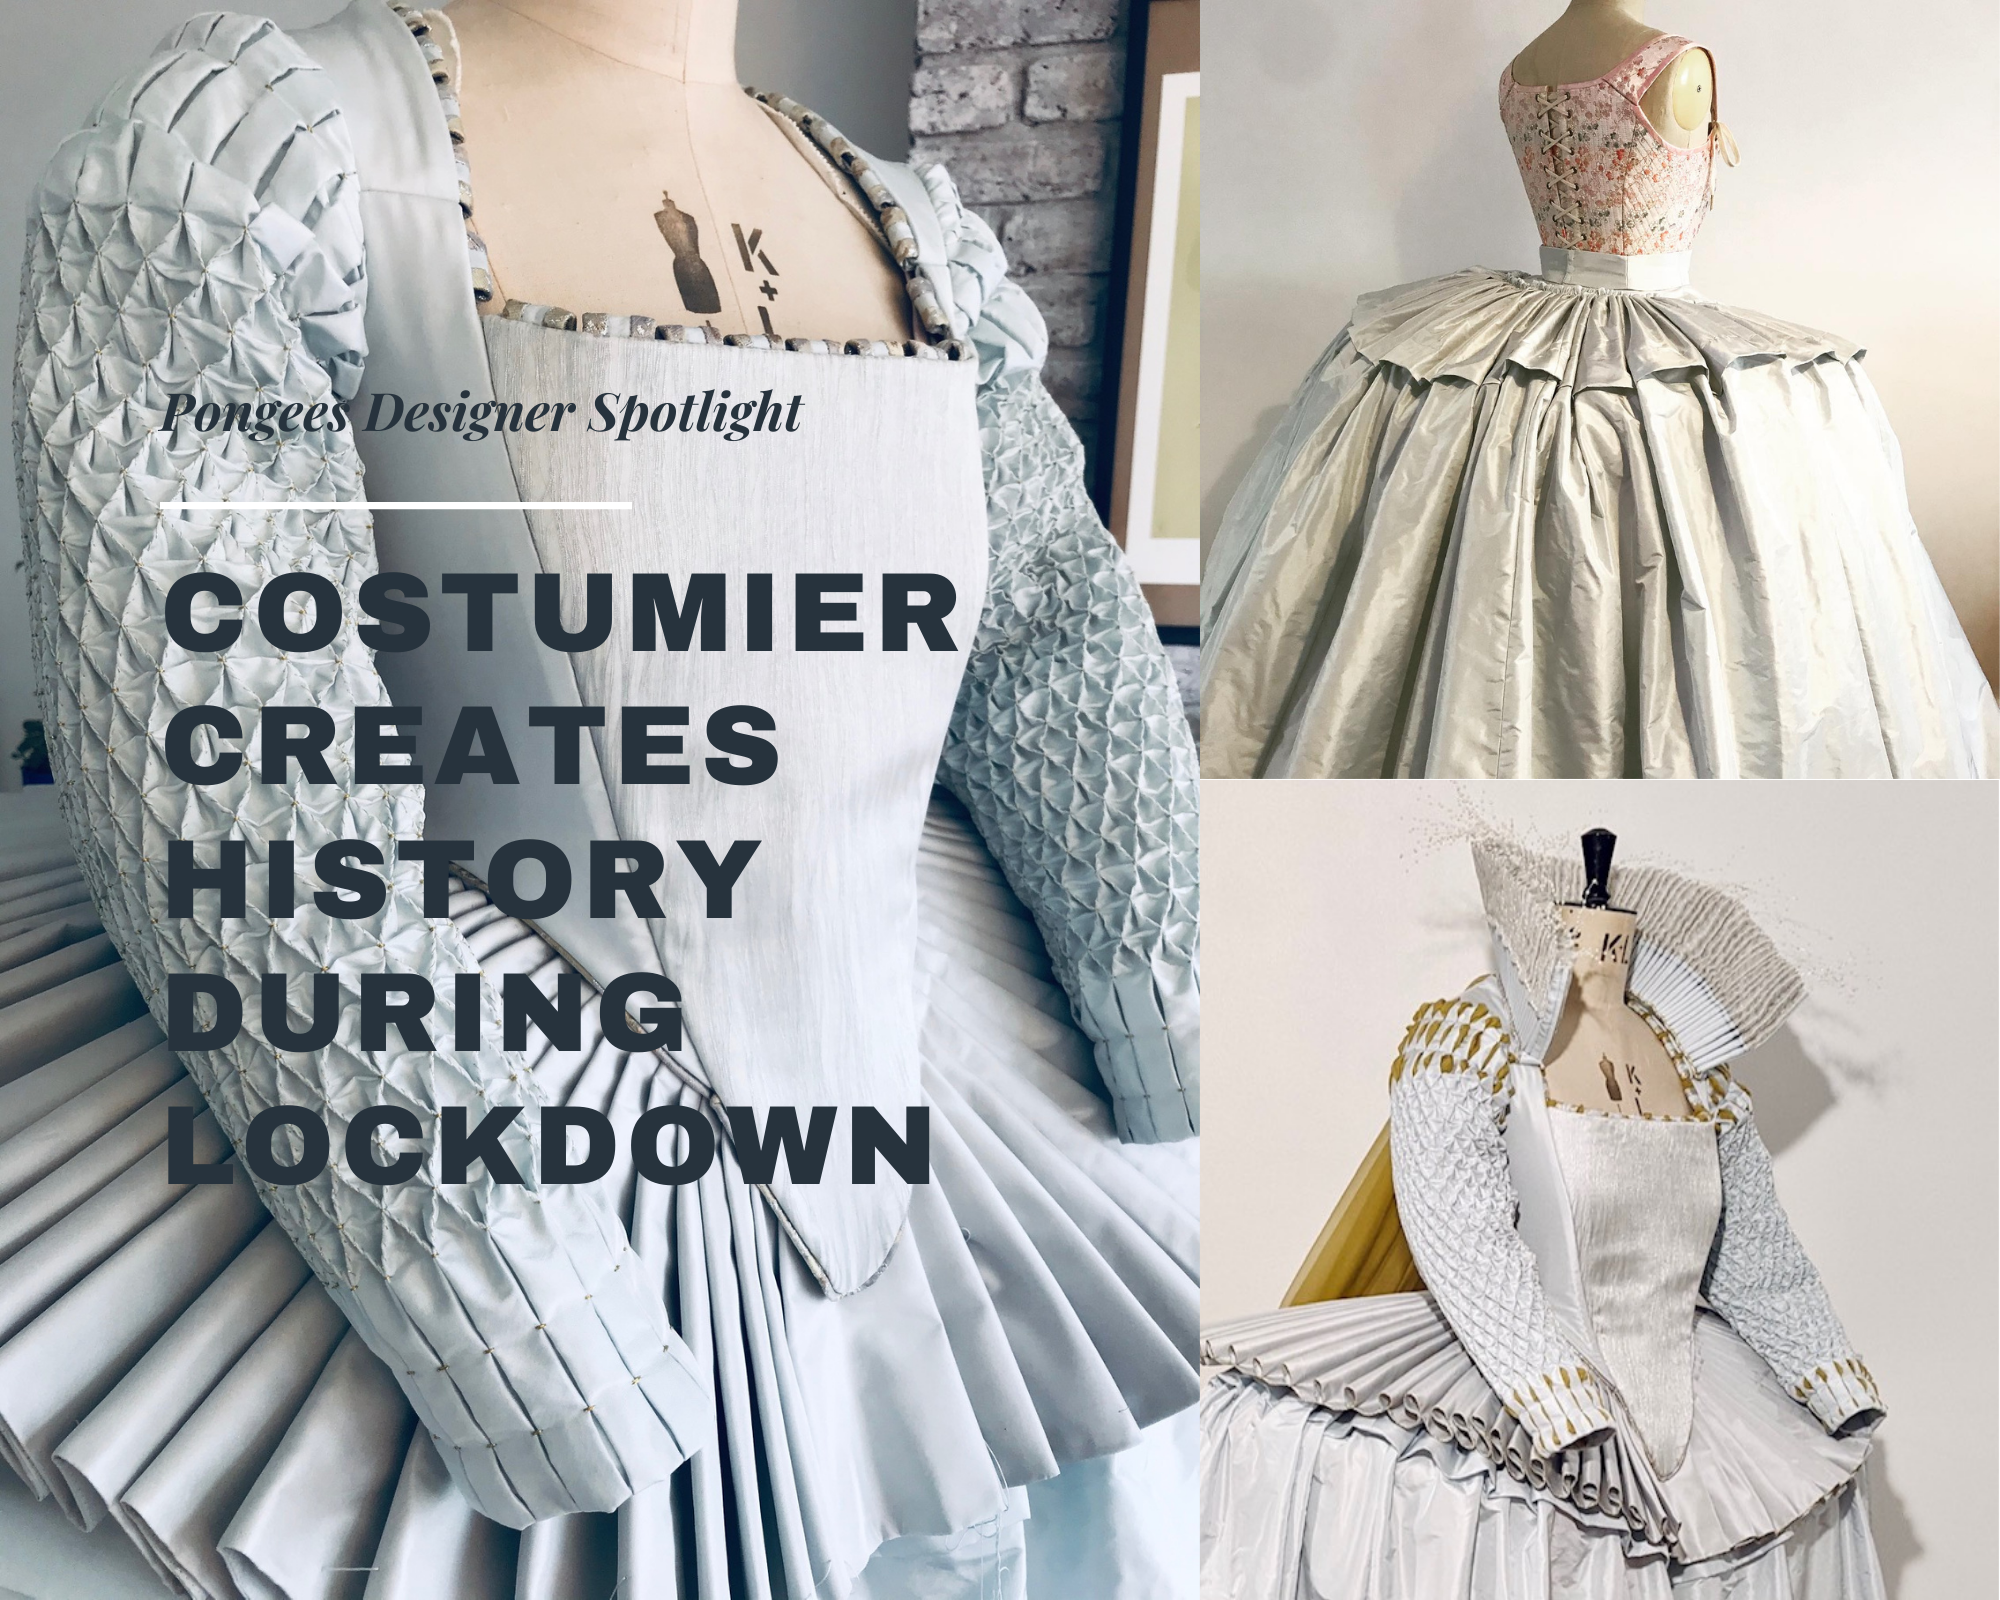 Costumier creates history during lockdown